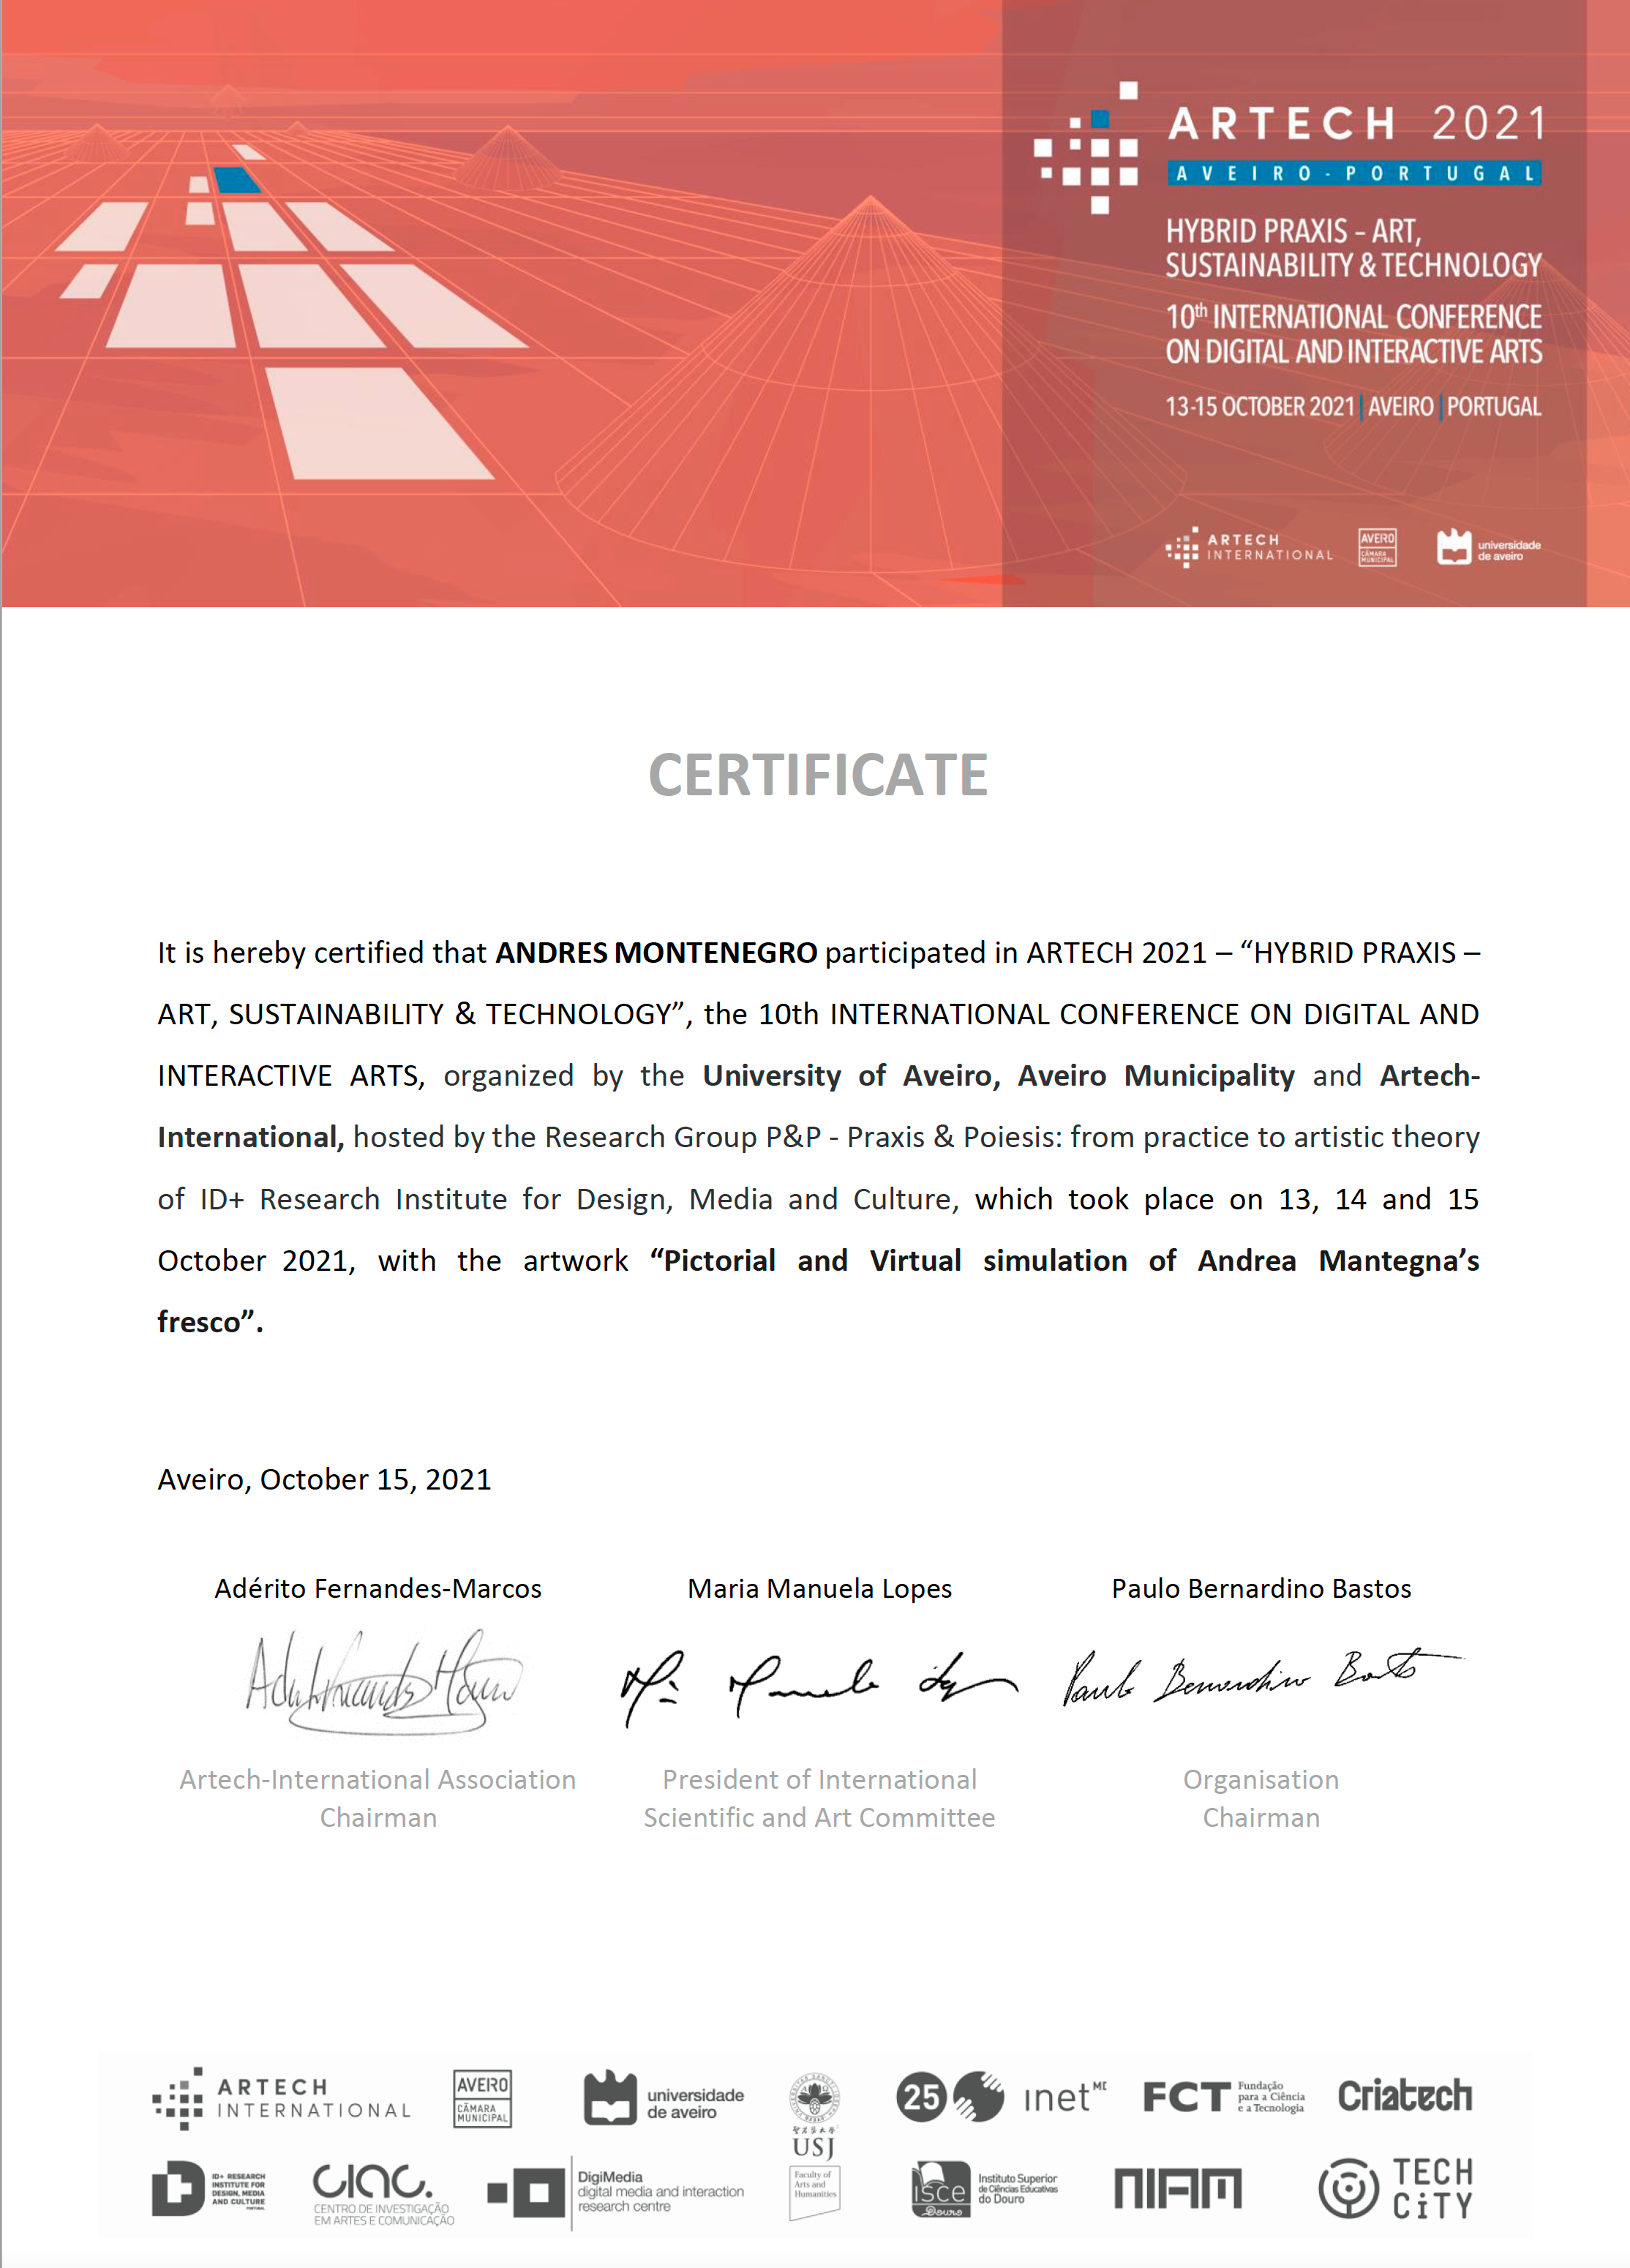 A picture of a certificate showing that Andres Montenegro has participated in the ARTech21 Conference